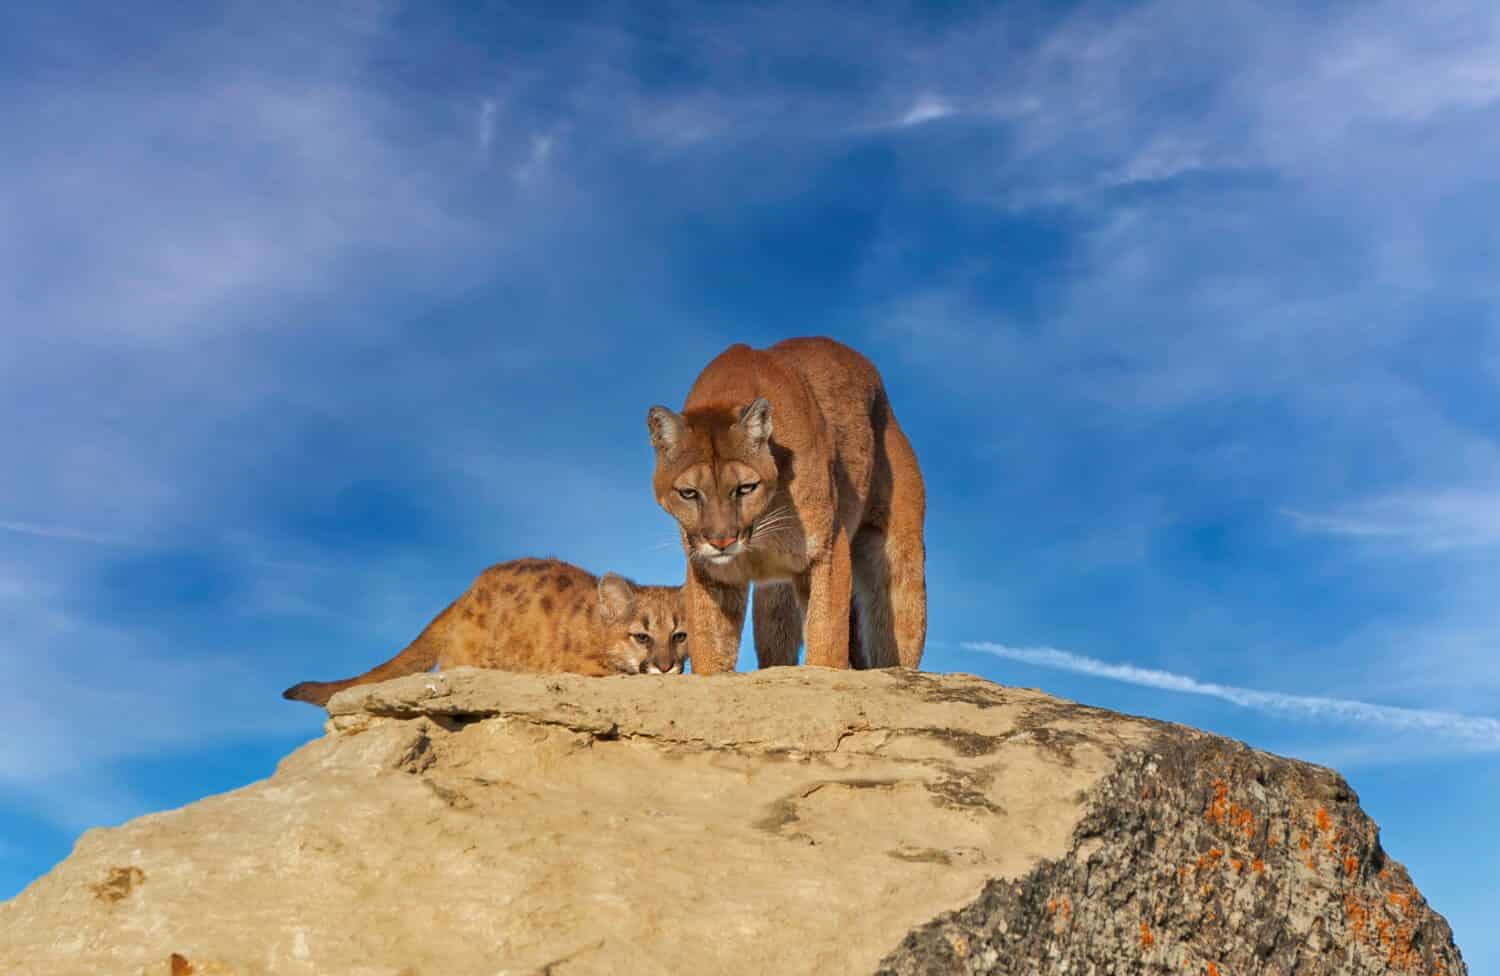 Mountain lion standing on large rock with her kit